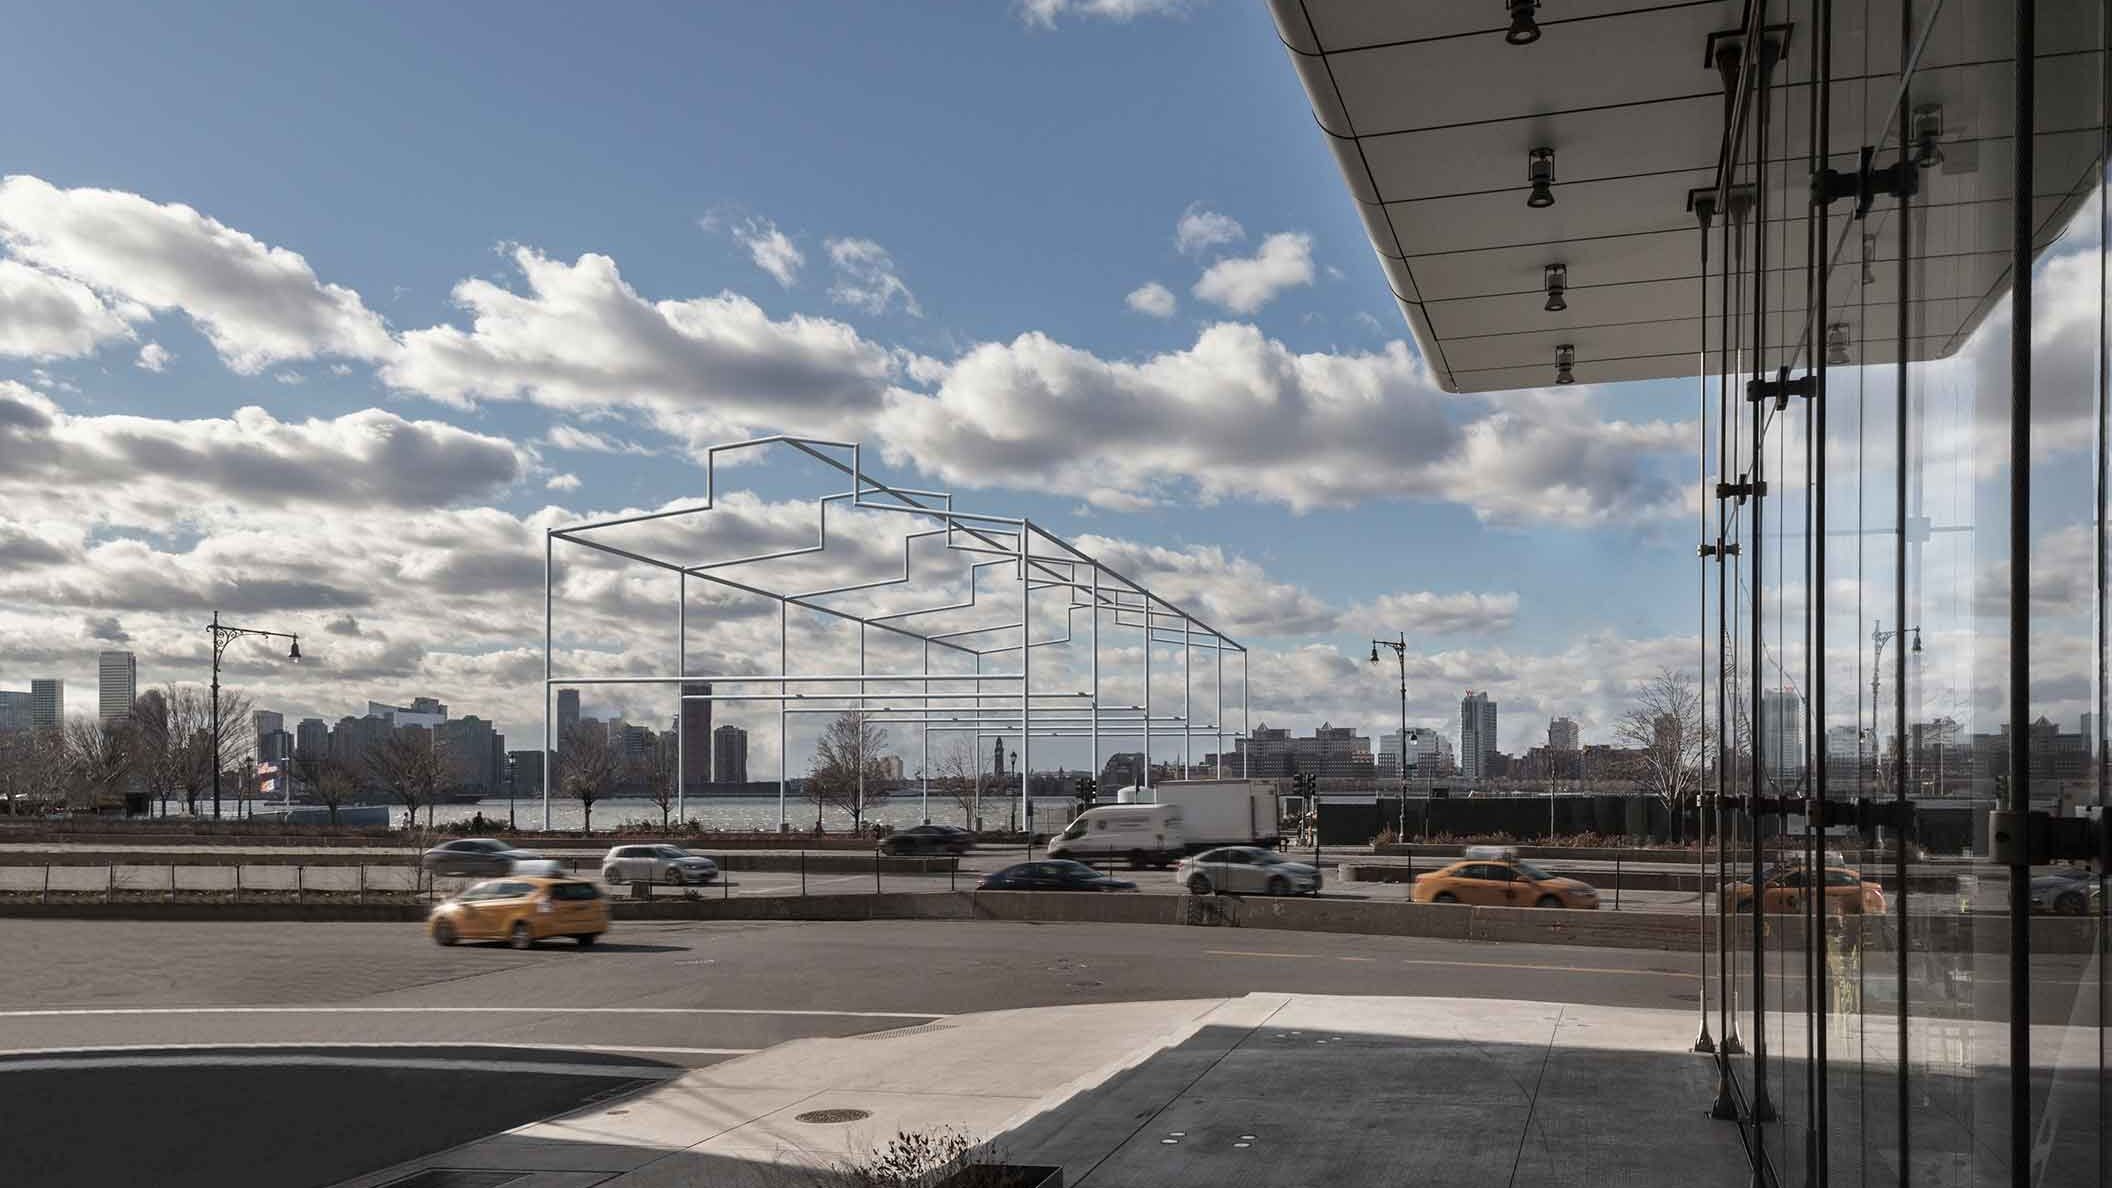 Rendering of David Hammon's Days End, a ghost pier structure symbolizing the old Pier 52 in Hudson River Park